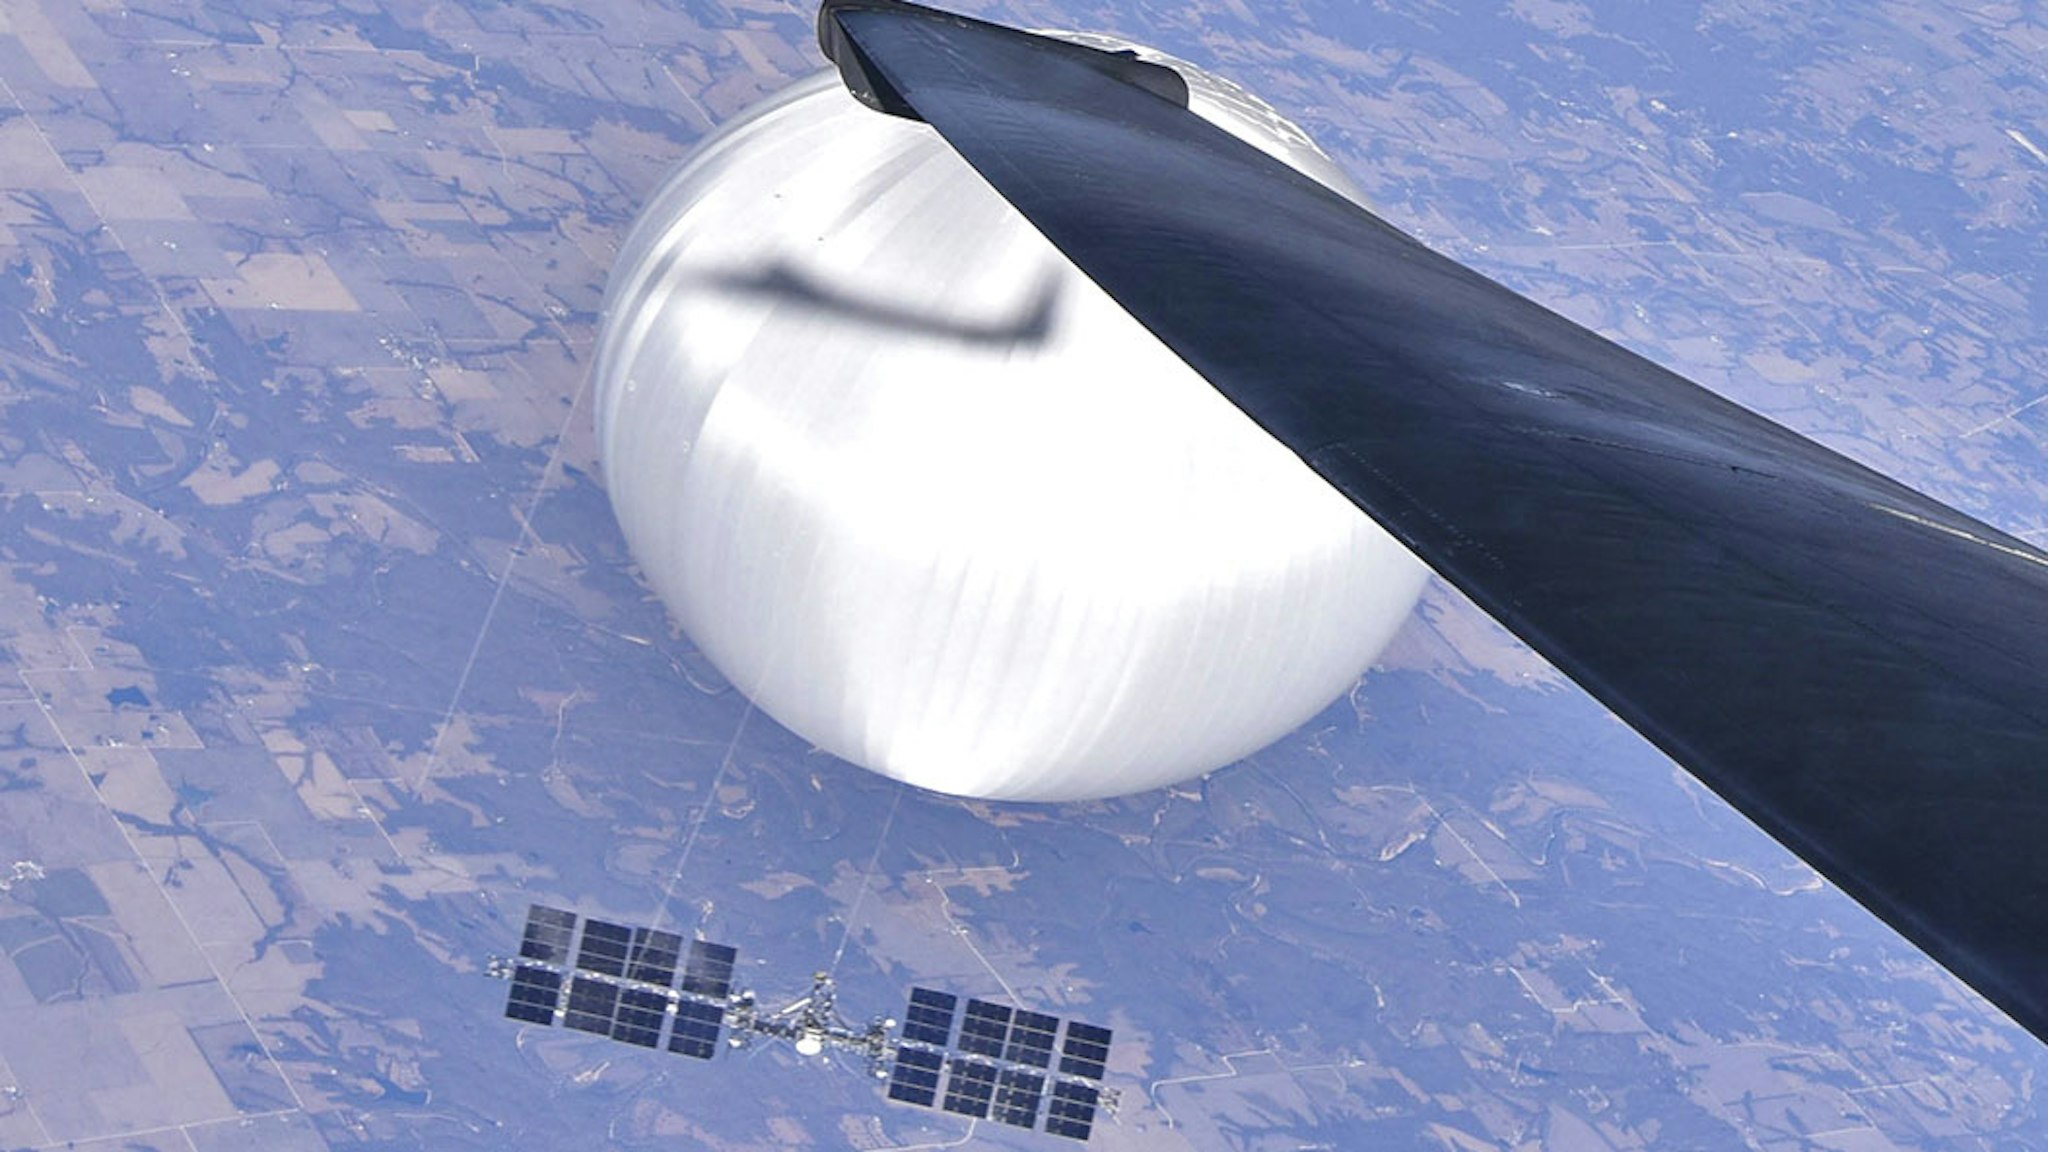 IN FLIGHT - FEBRUARY 3: In this handout image provided by the Department of Defense, a U.S. Air Force U-2 pilot looks down at the suspected Chinese surveillance balloon on February 3, 2023 as it hovers over the Central Continental United States. Recovery efforts began shortly after the balloon was downed.